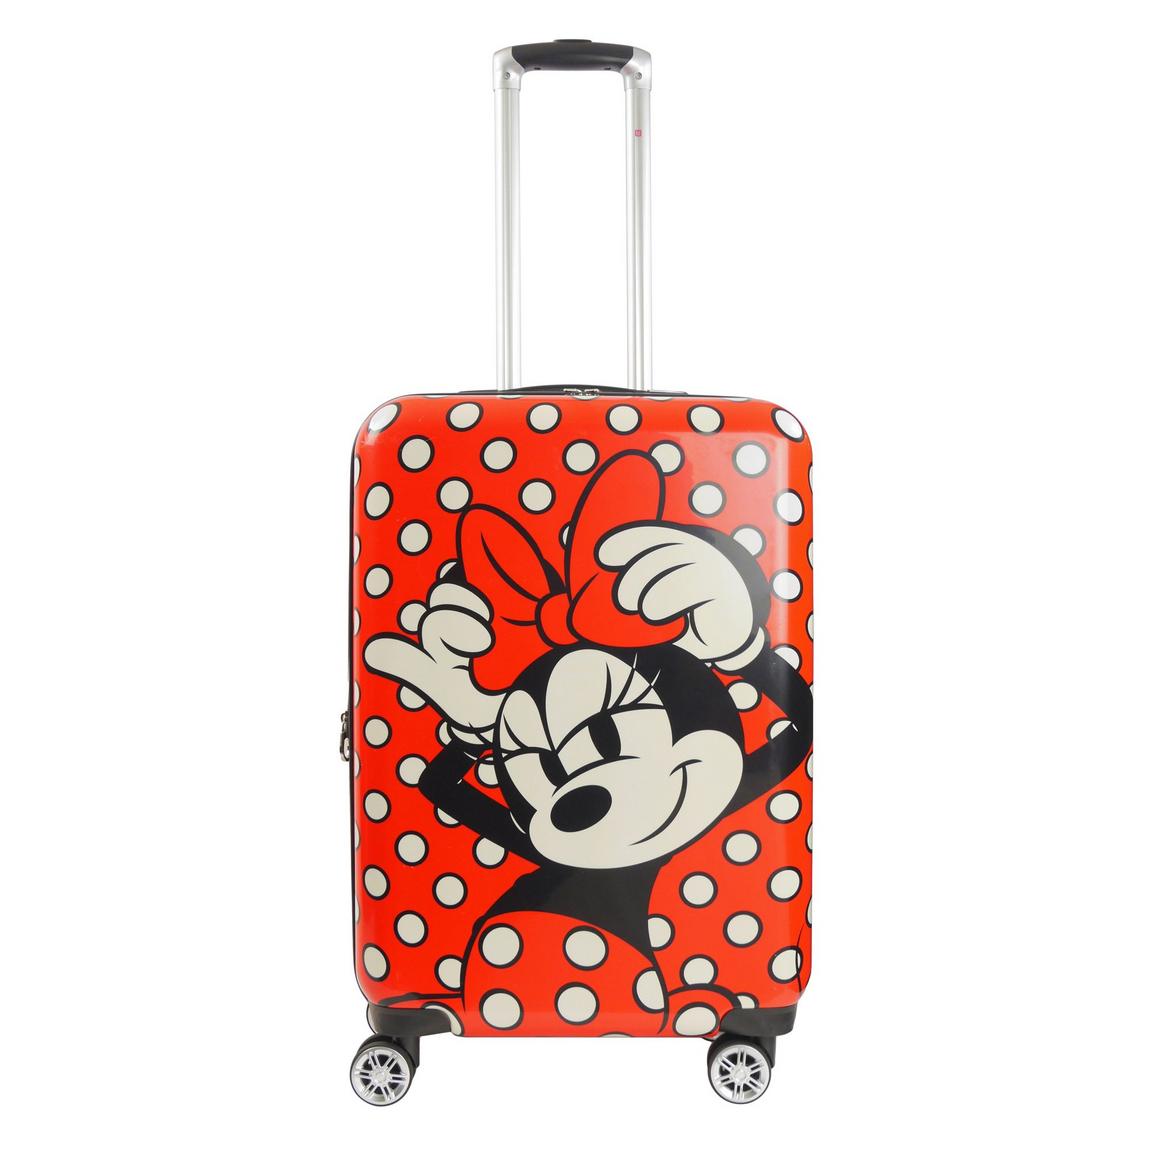 Disney Ful Minnie Mouse Printed Polka Dot II 22-in Hard-Sided Roller Luggage, Concept One